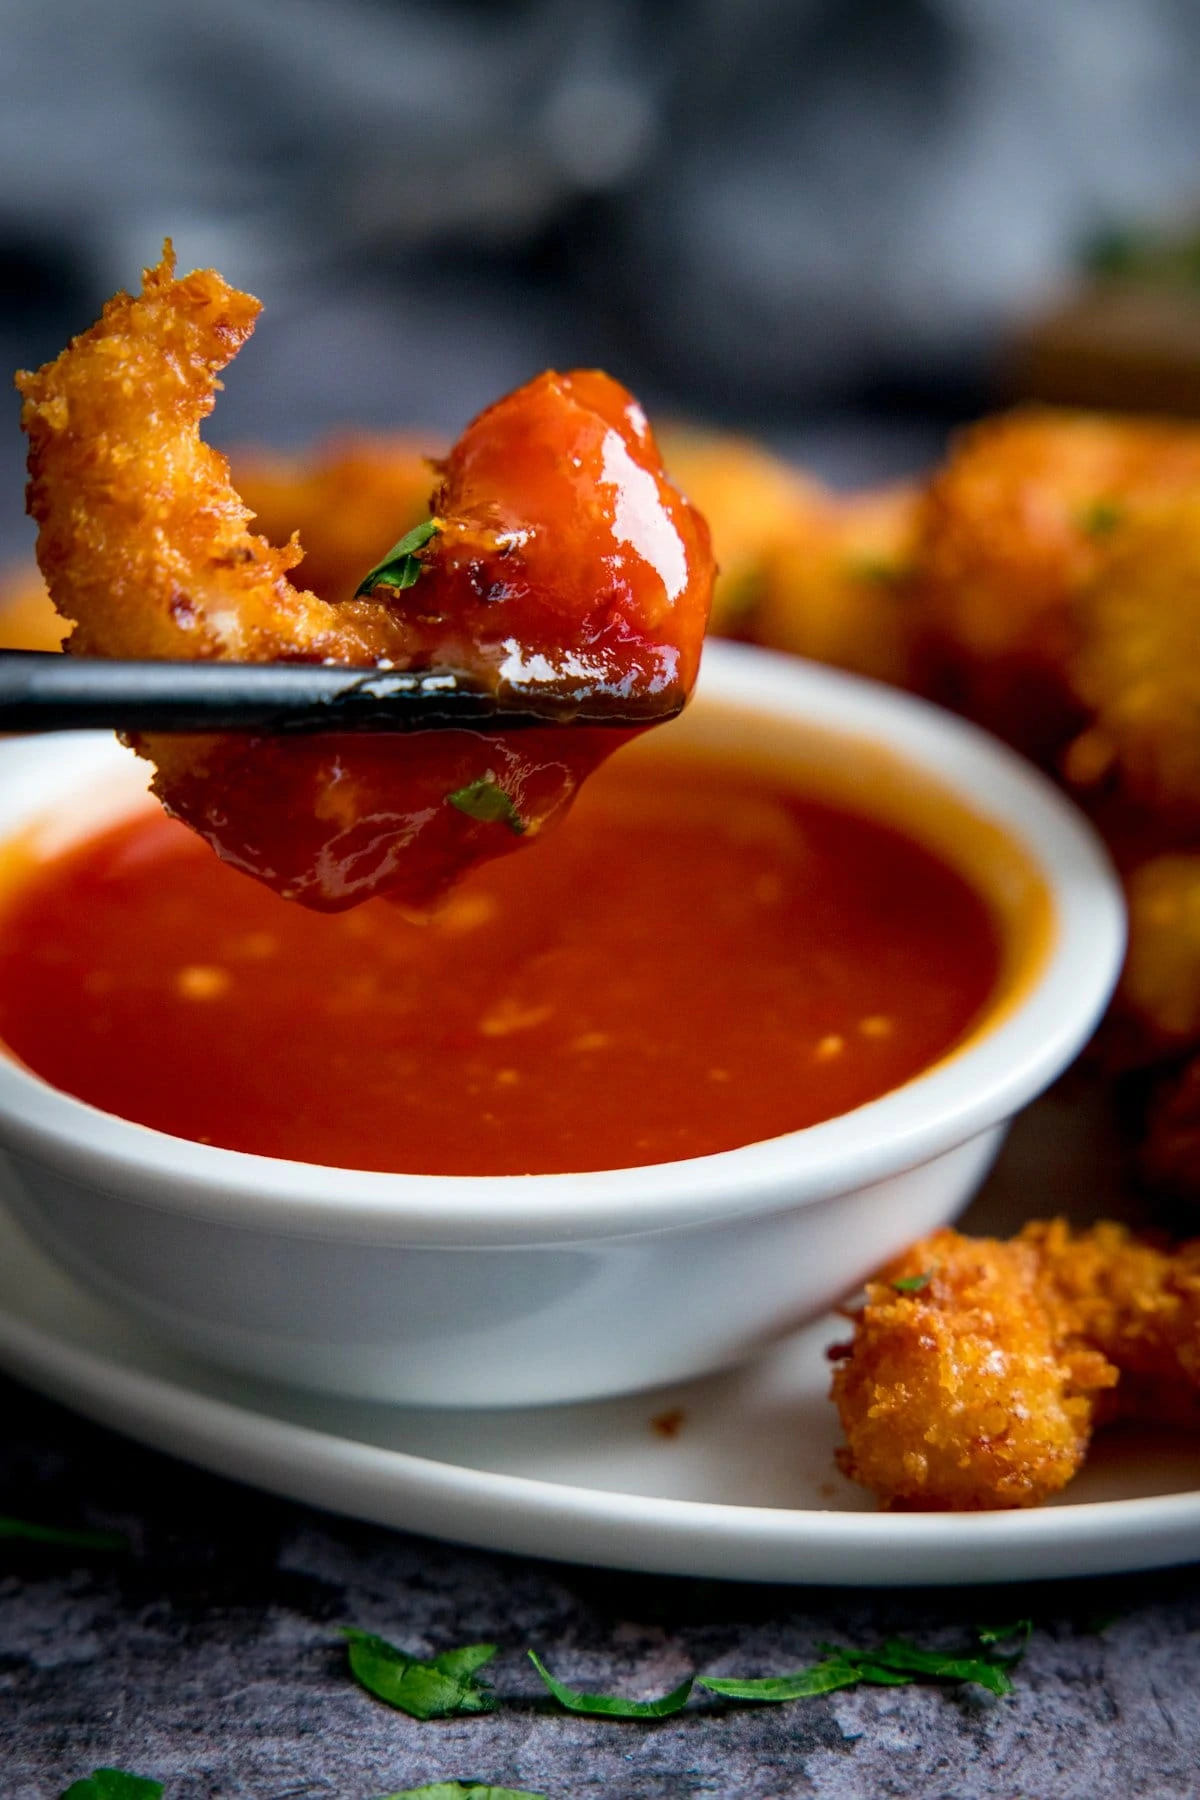 Coconut shrimp being dipped into a dish of sweet and sour sauce using chopsticks